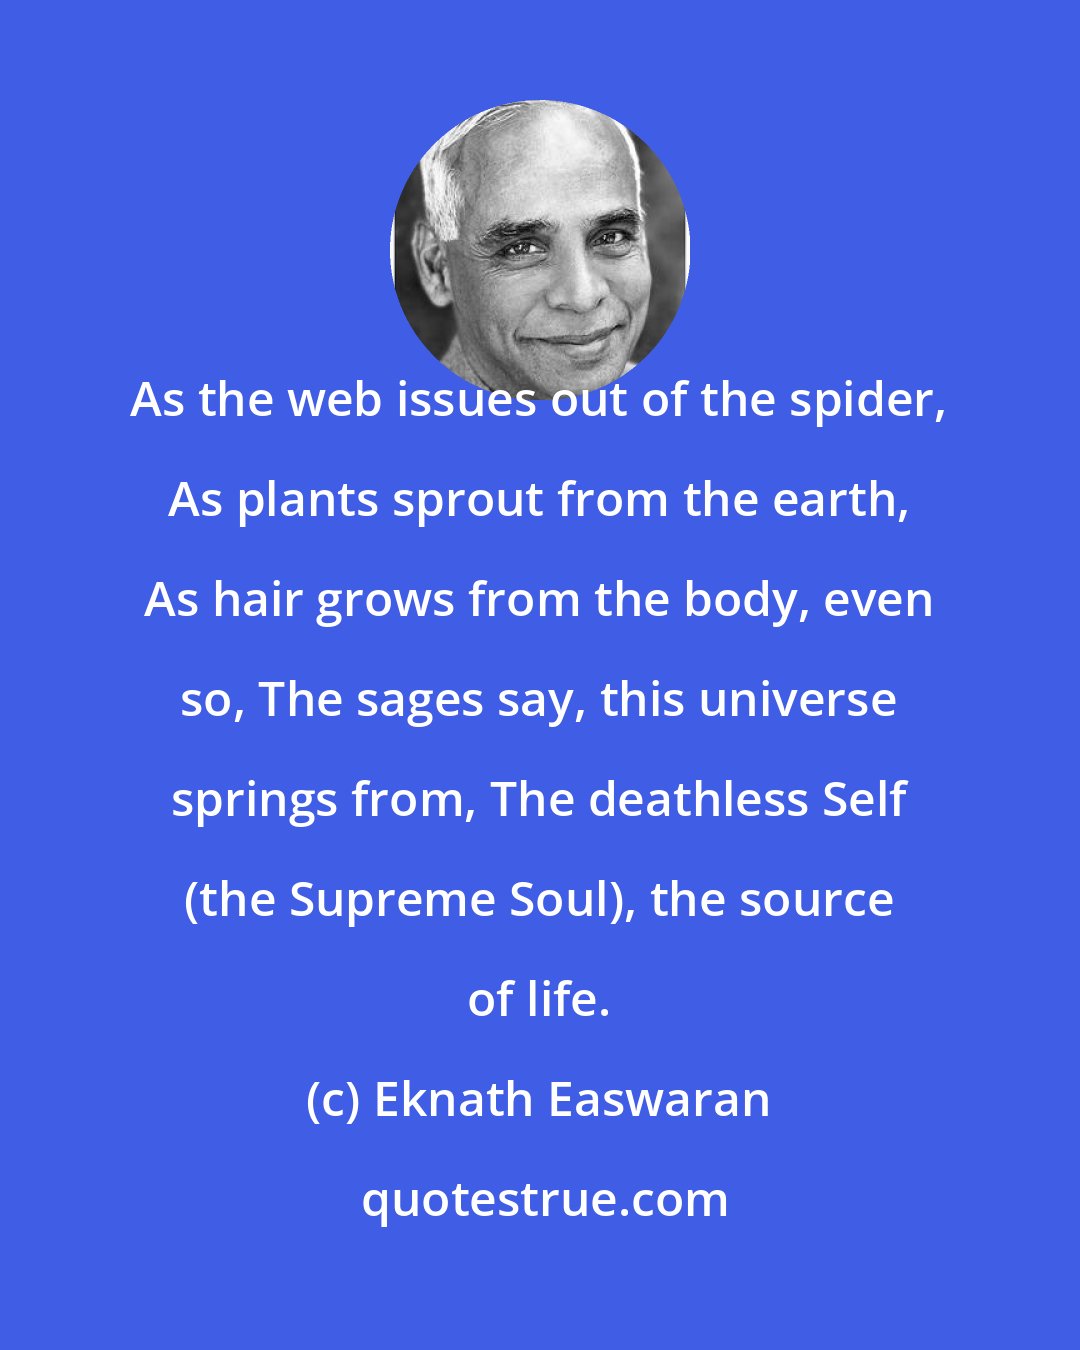 Eknath Easwaran: As the web issues out of the spider, As plants sprout from the earth, As hair grows from the body, even so, The sages say, this universe springs from, The deathless Self (the Supreme Soul), the source of life.